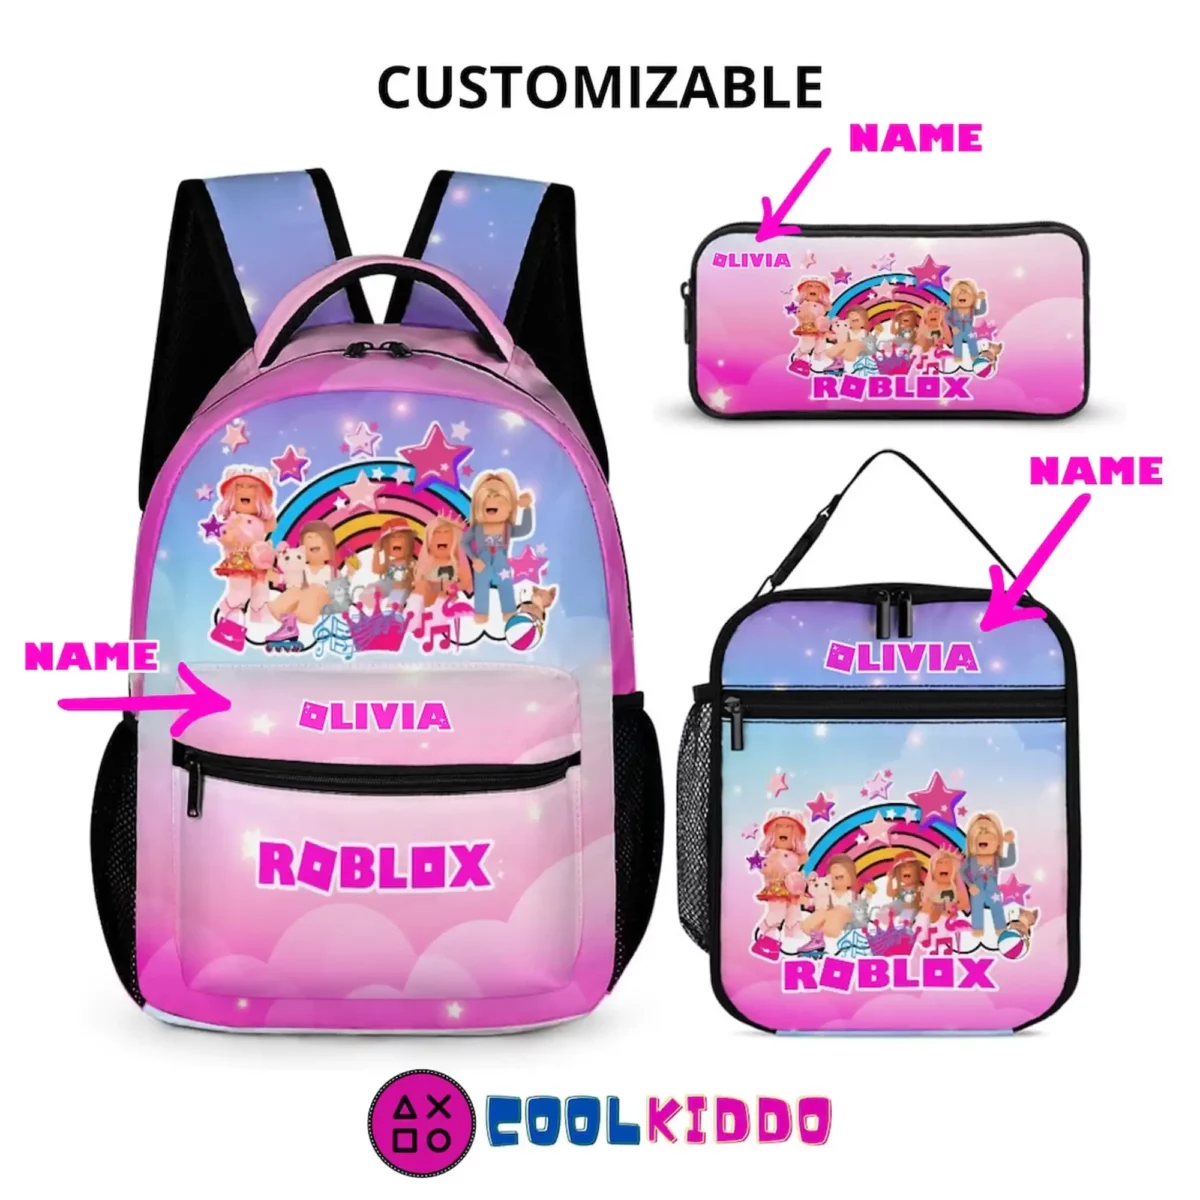 Customizable Roblox Girl backpack, lunch bag and pencil case package | Back to School combo Cool Kiddo 10